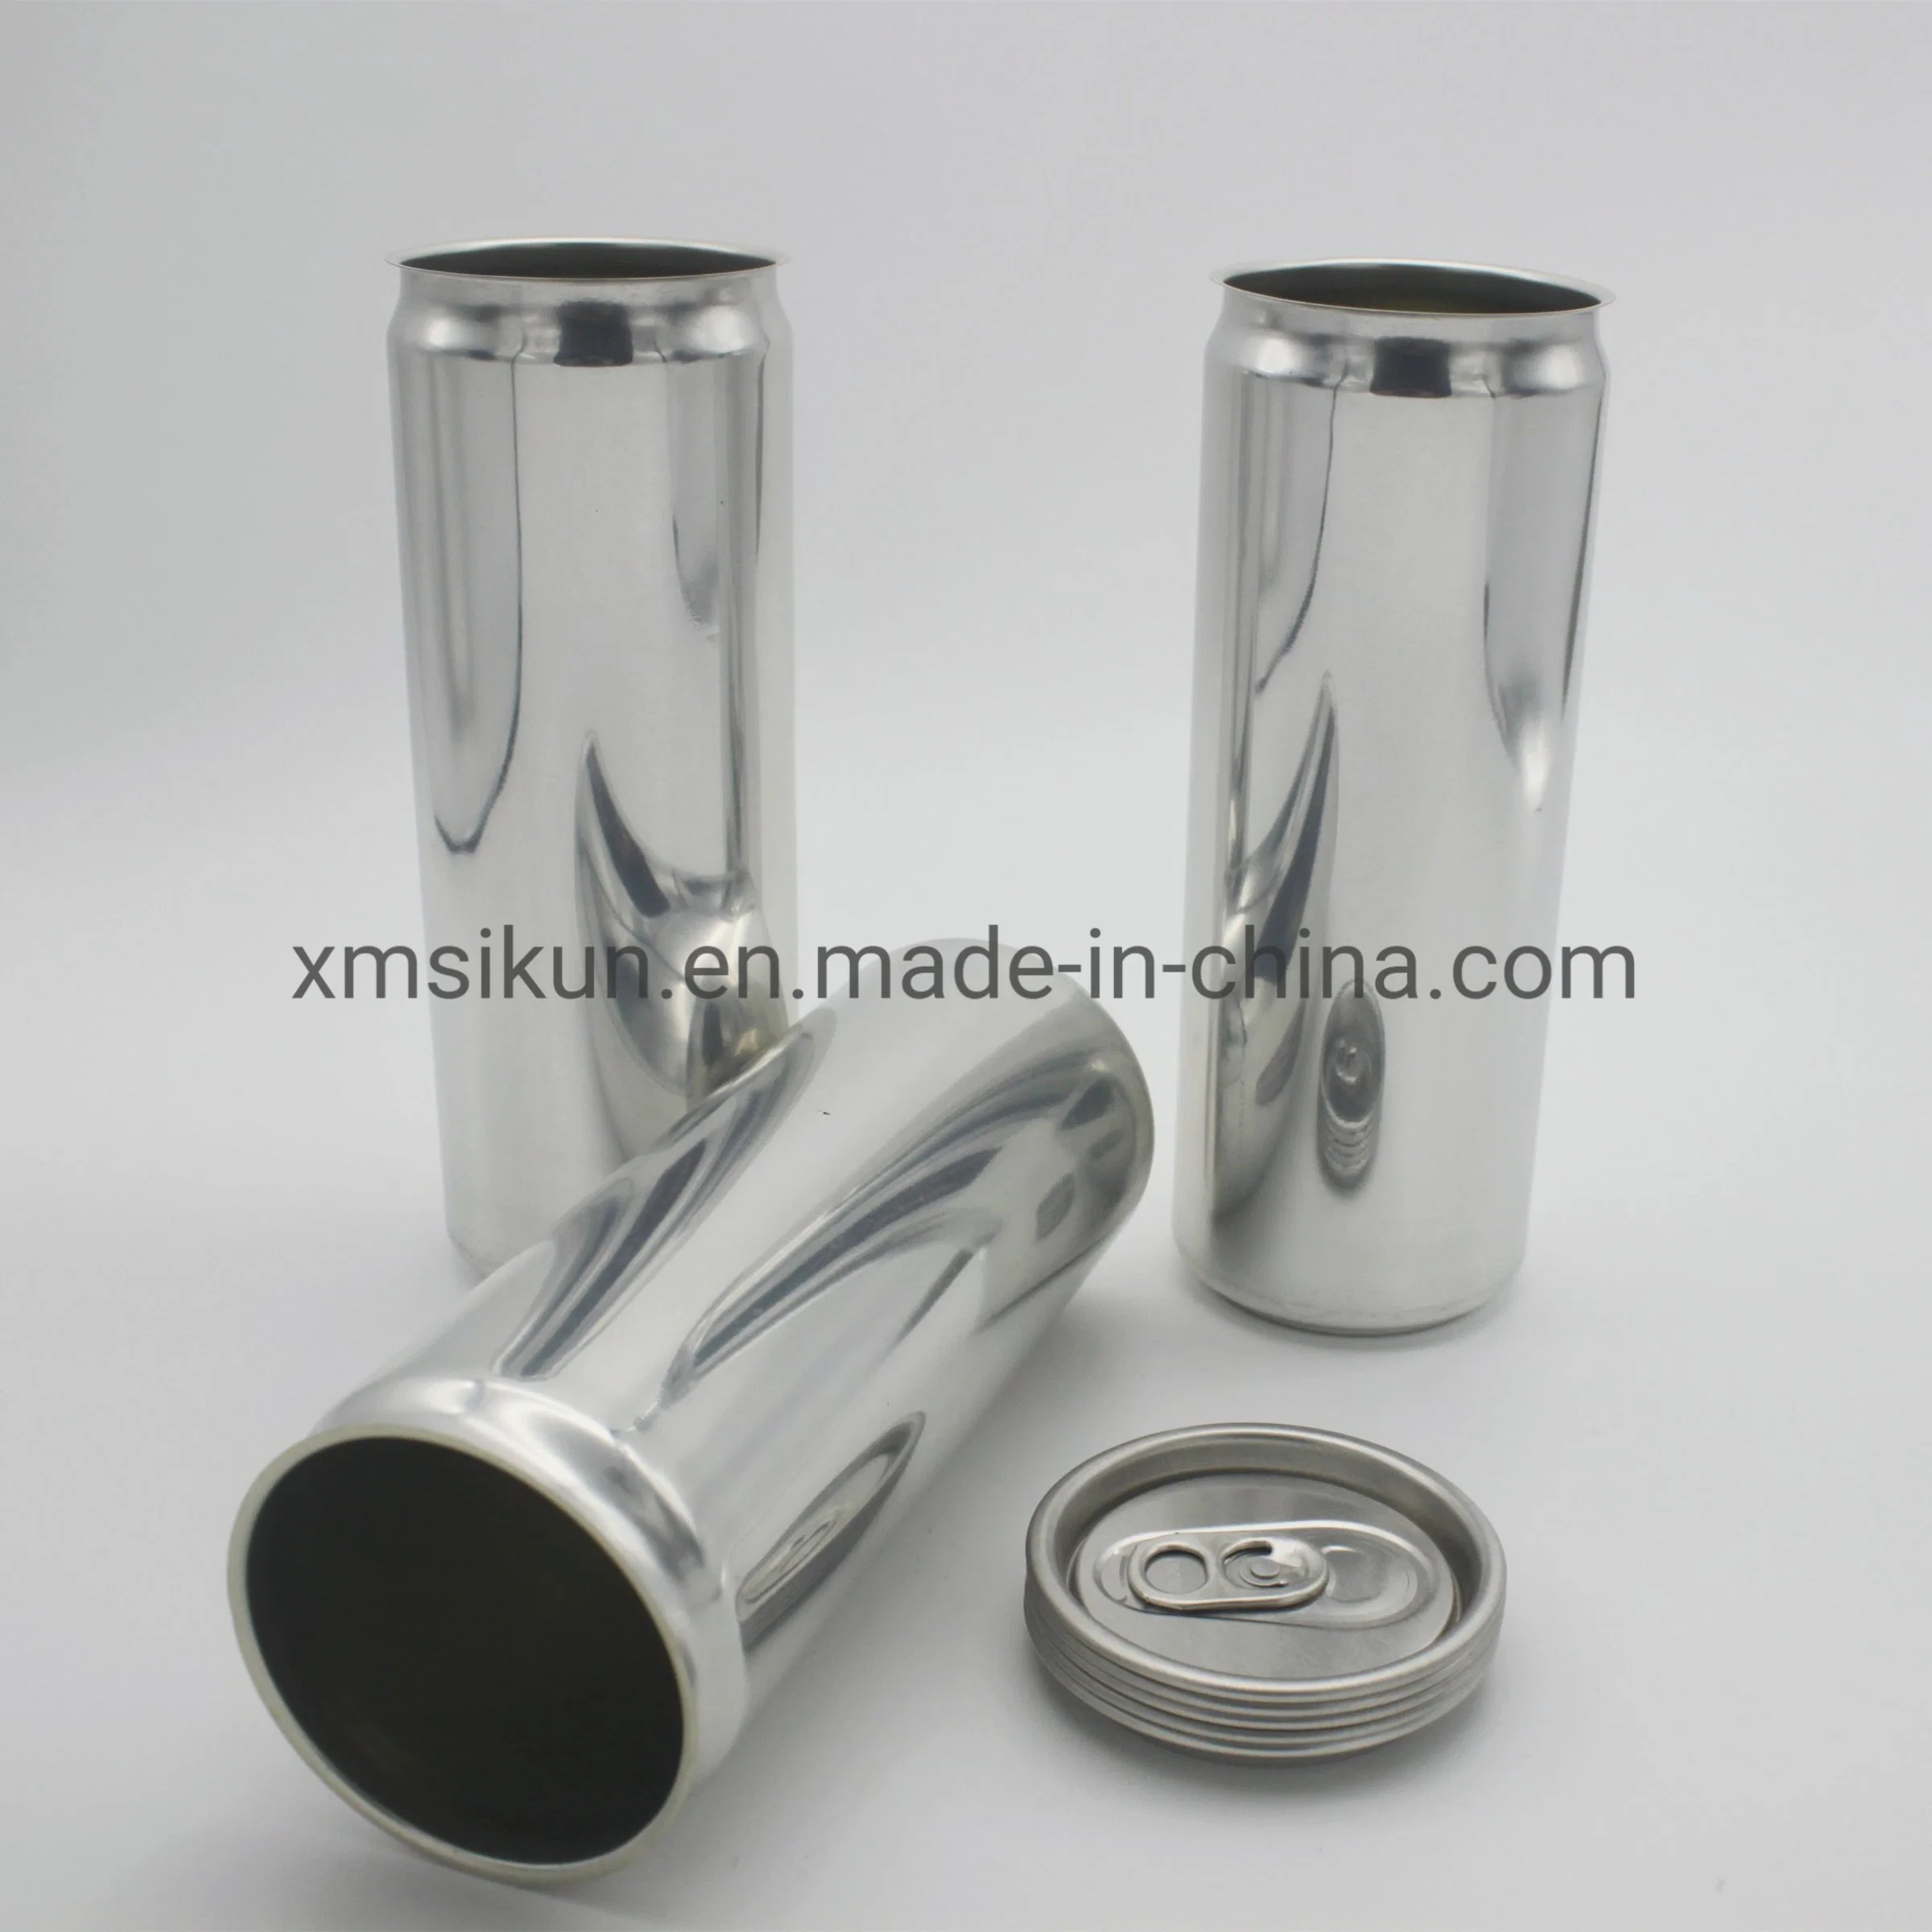 Factory Direct Sale 355ml Aluminum Can Price Low for Coffee Juice Soda Beverage Packaging